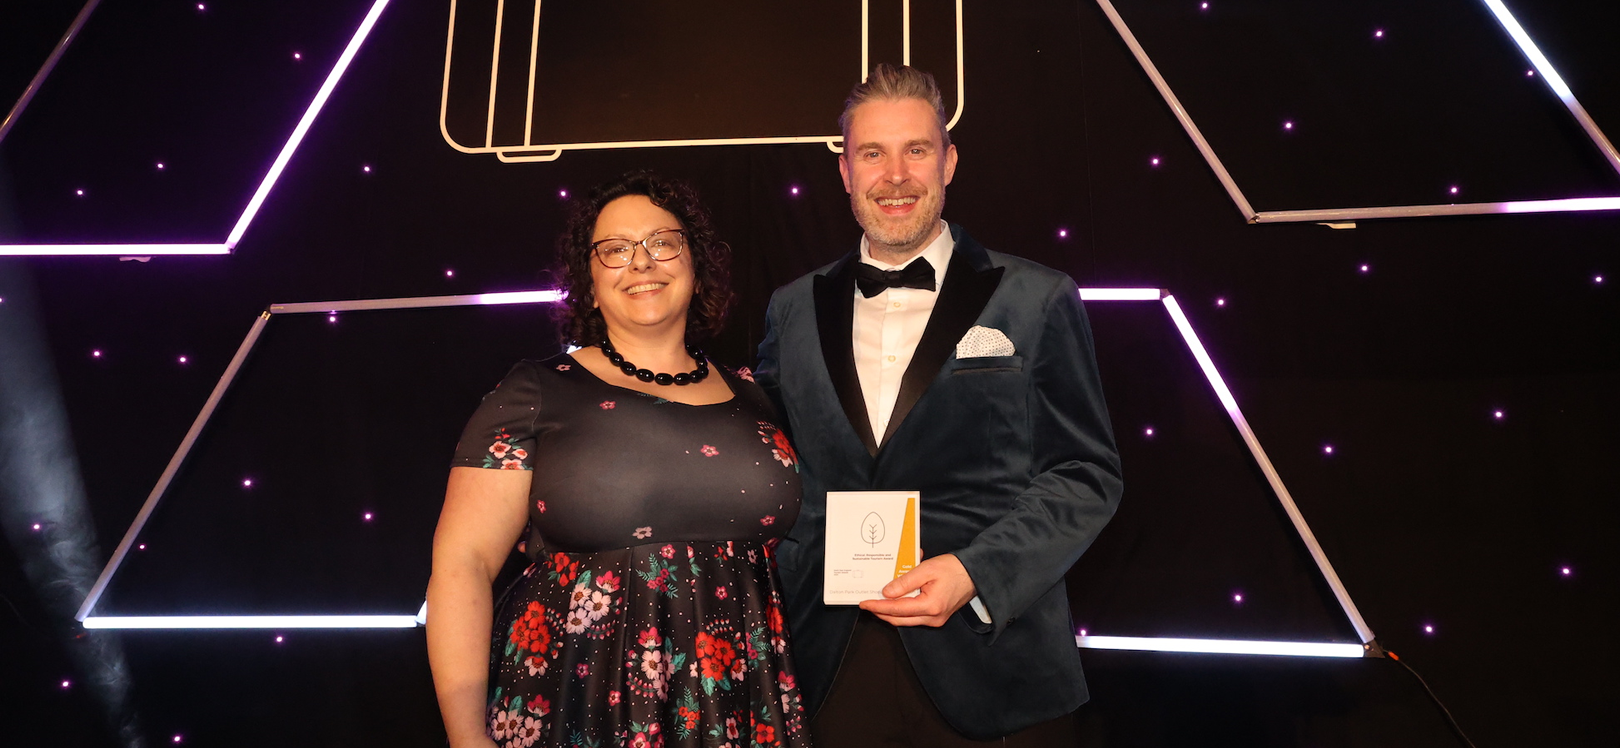 Two people holding an award for Dalton Park